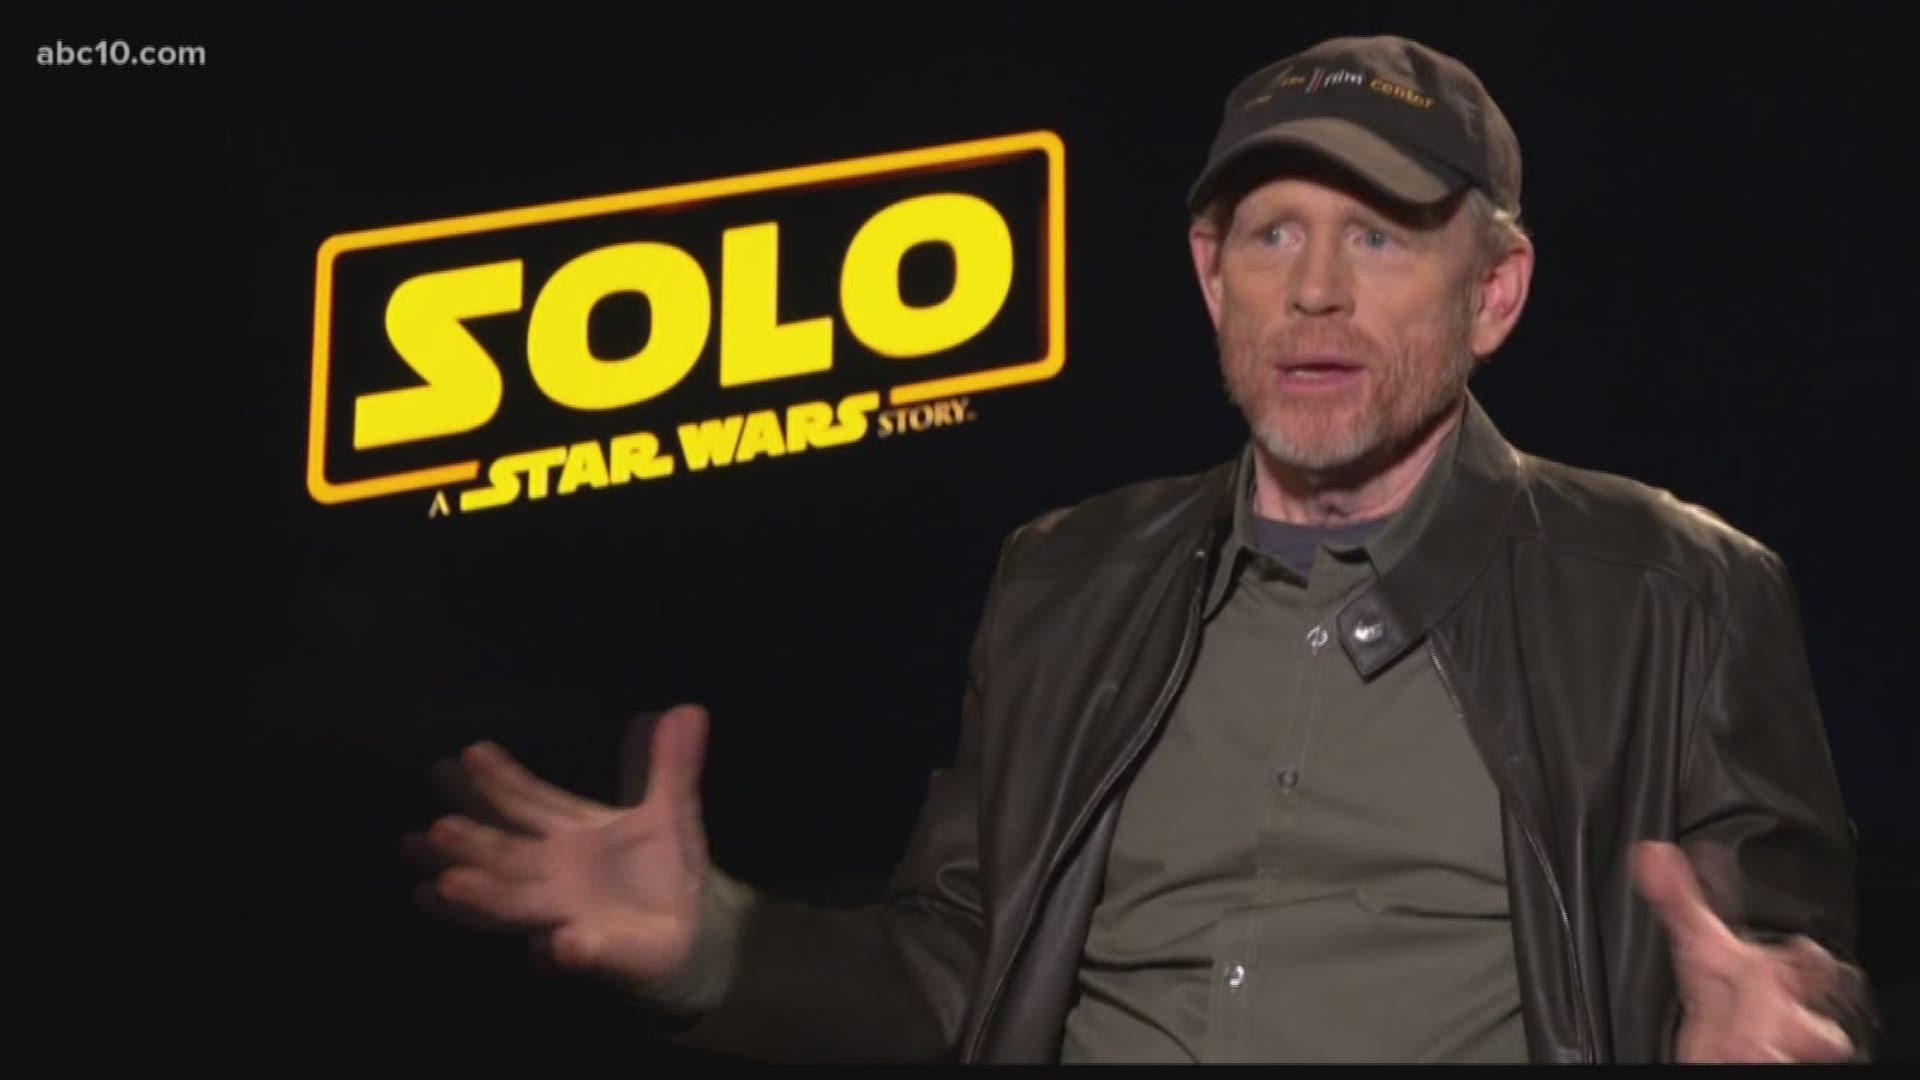 Mark S. A;;en sat down with Ron Howard, the director of the latest Star Wars film, to talk all things "Solo."